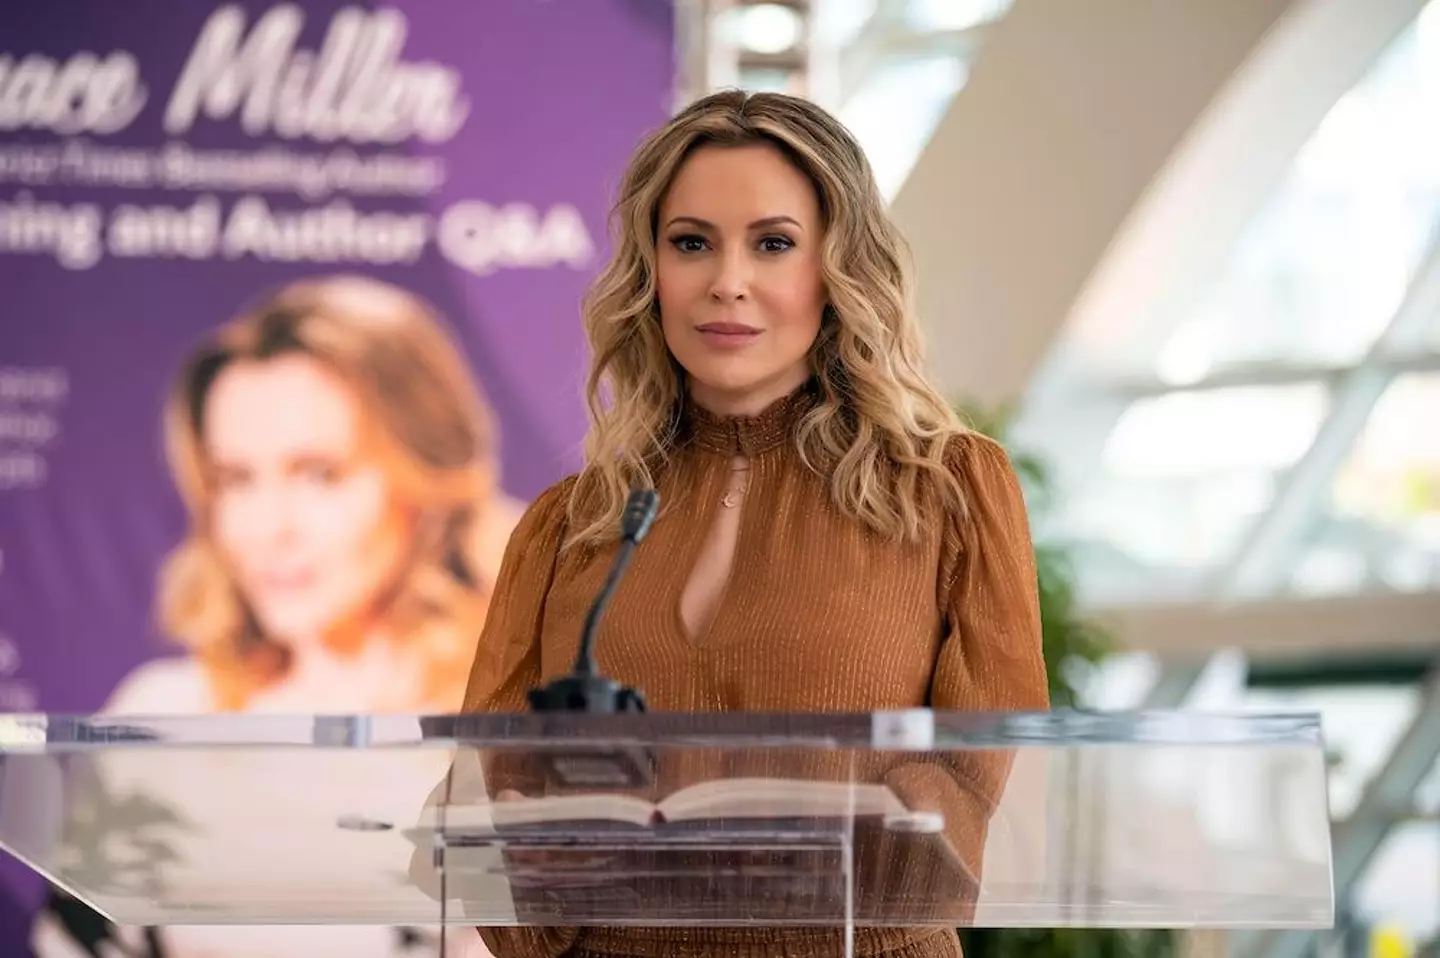 Alyssa Milano said she traded her Tesla for a VW electric vehicle.